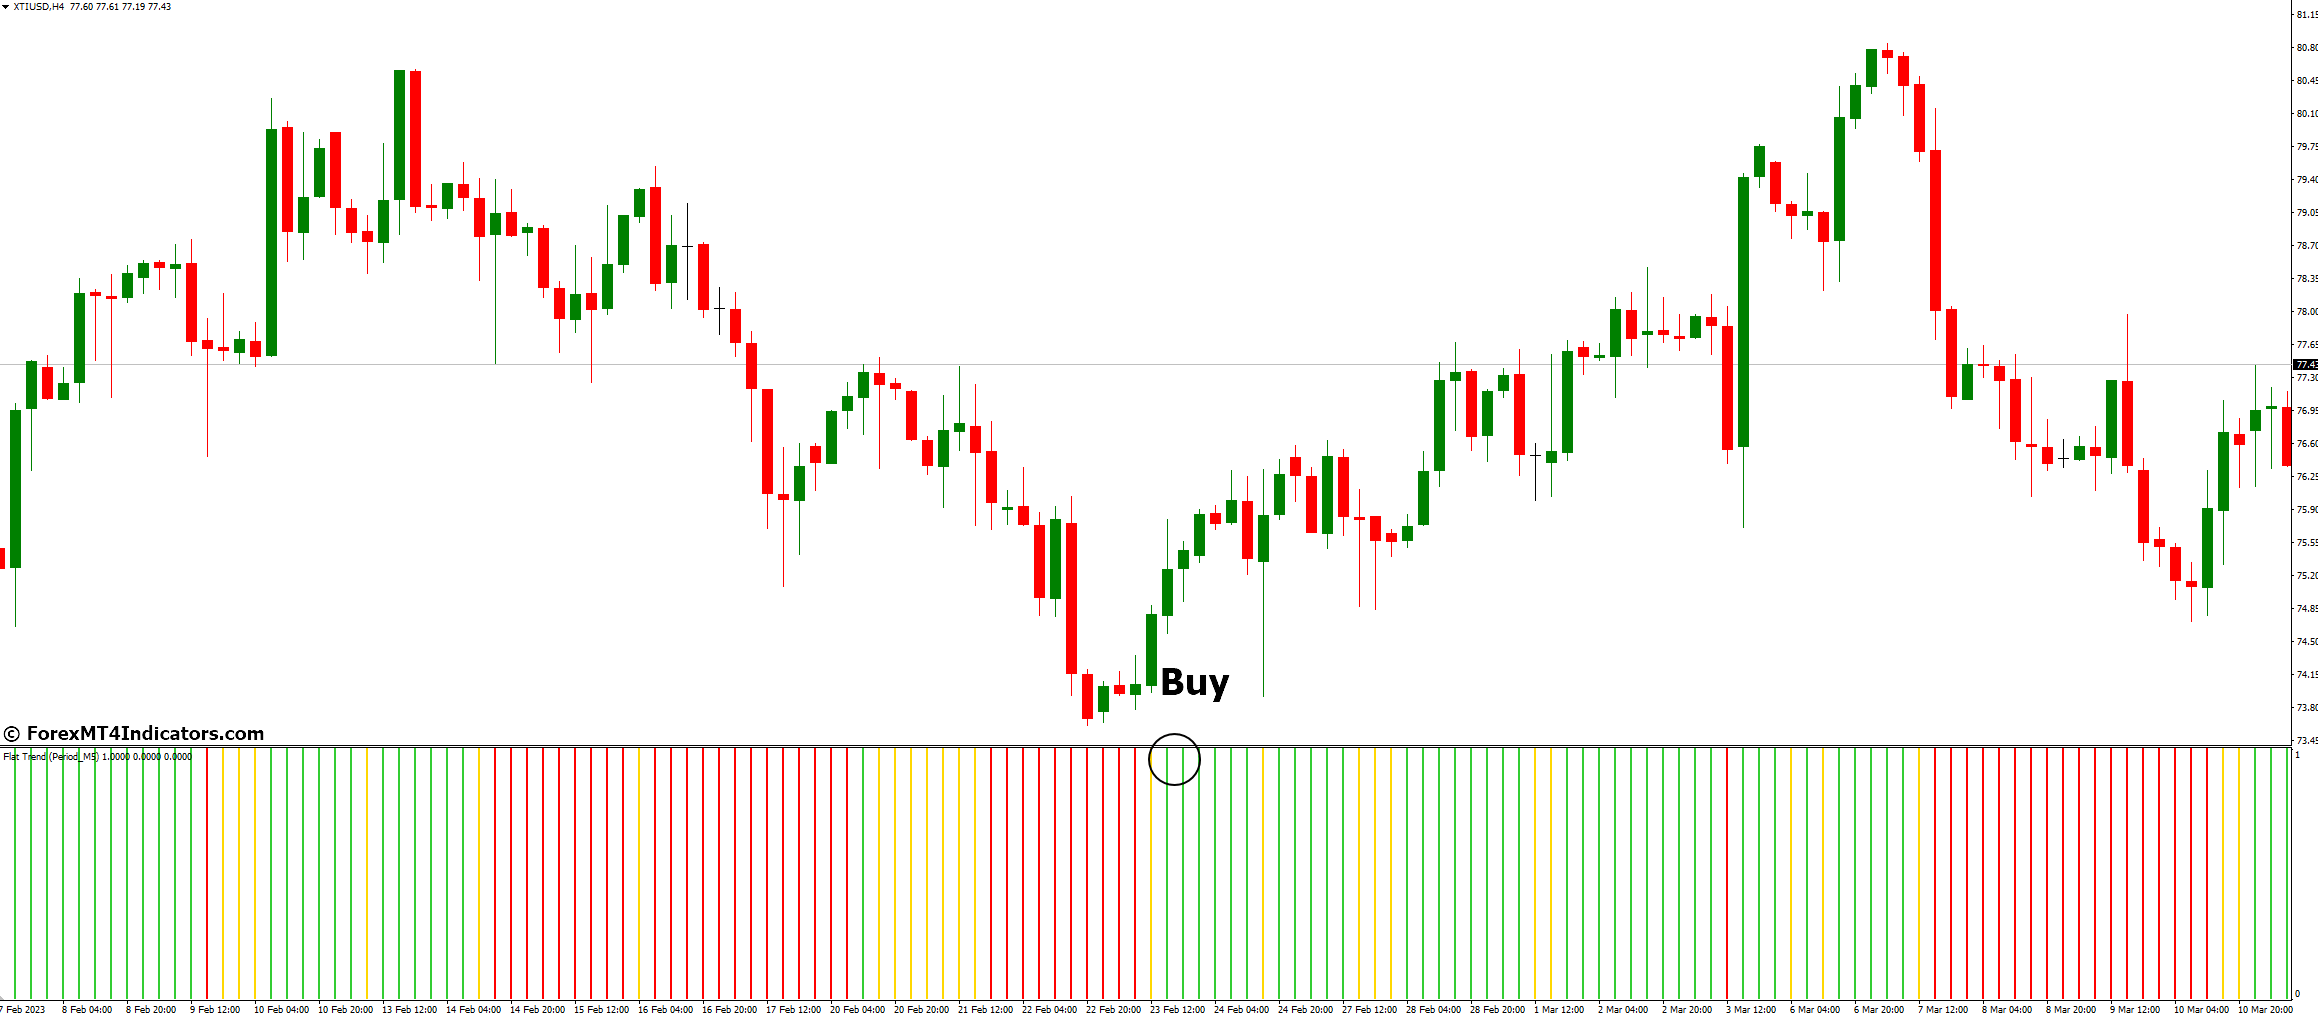 How to Trade with Flat Trend Indicator - Buy Entry